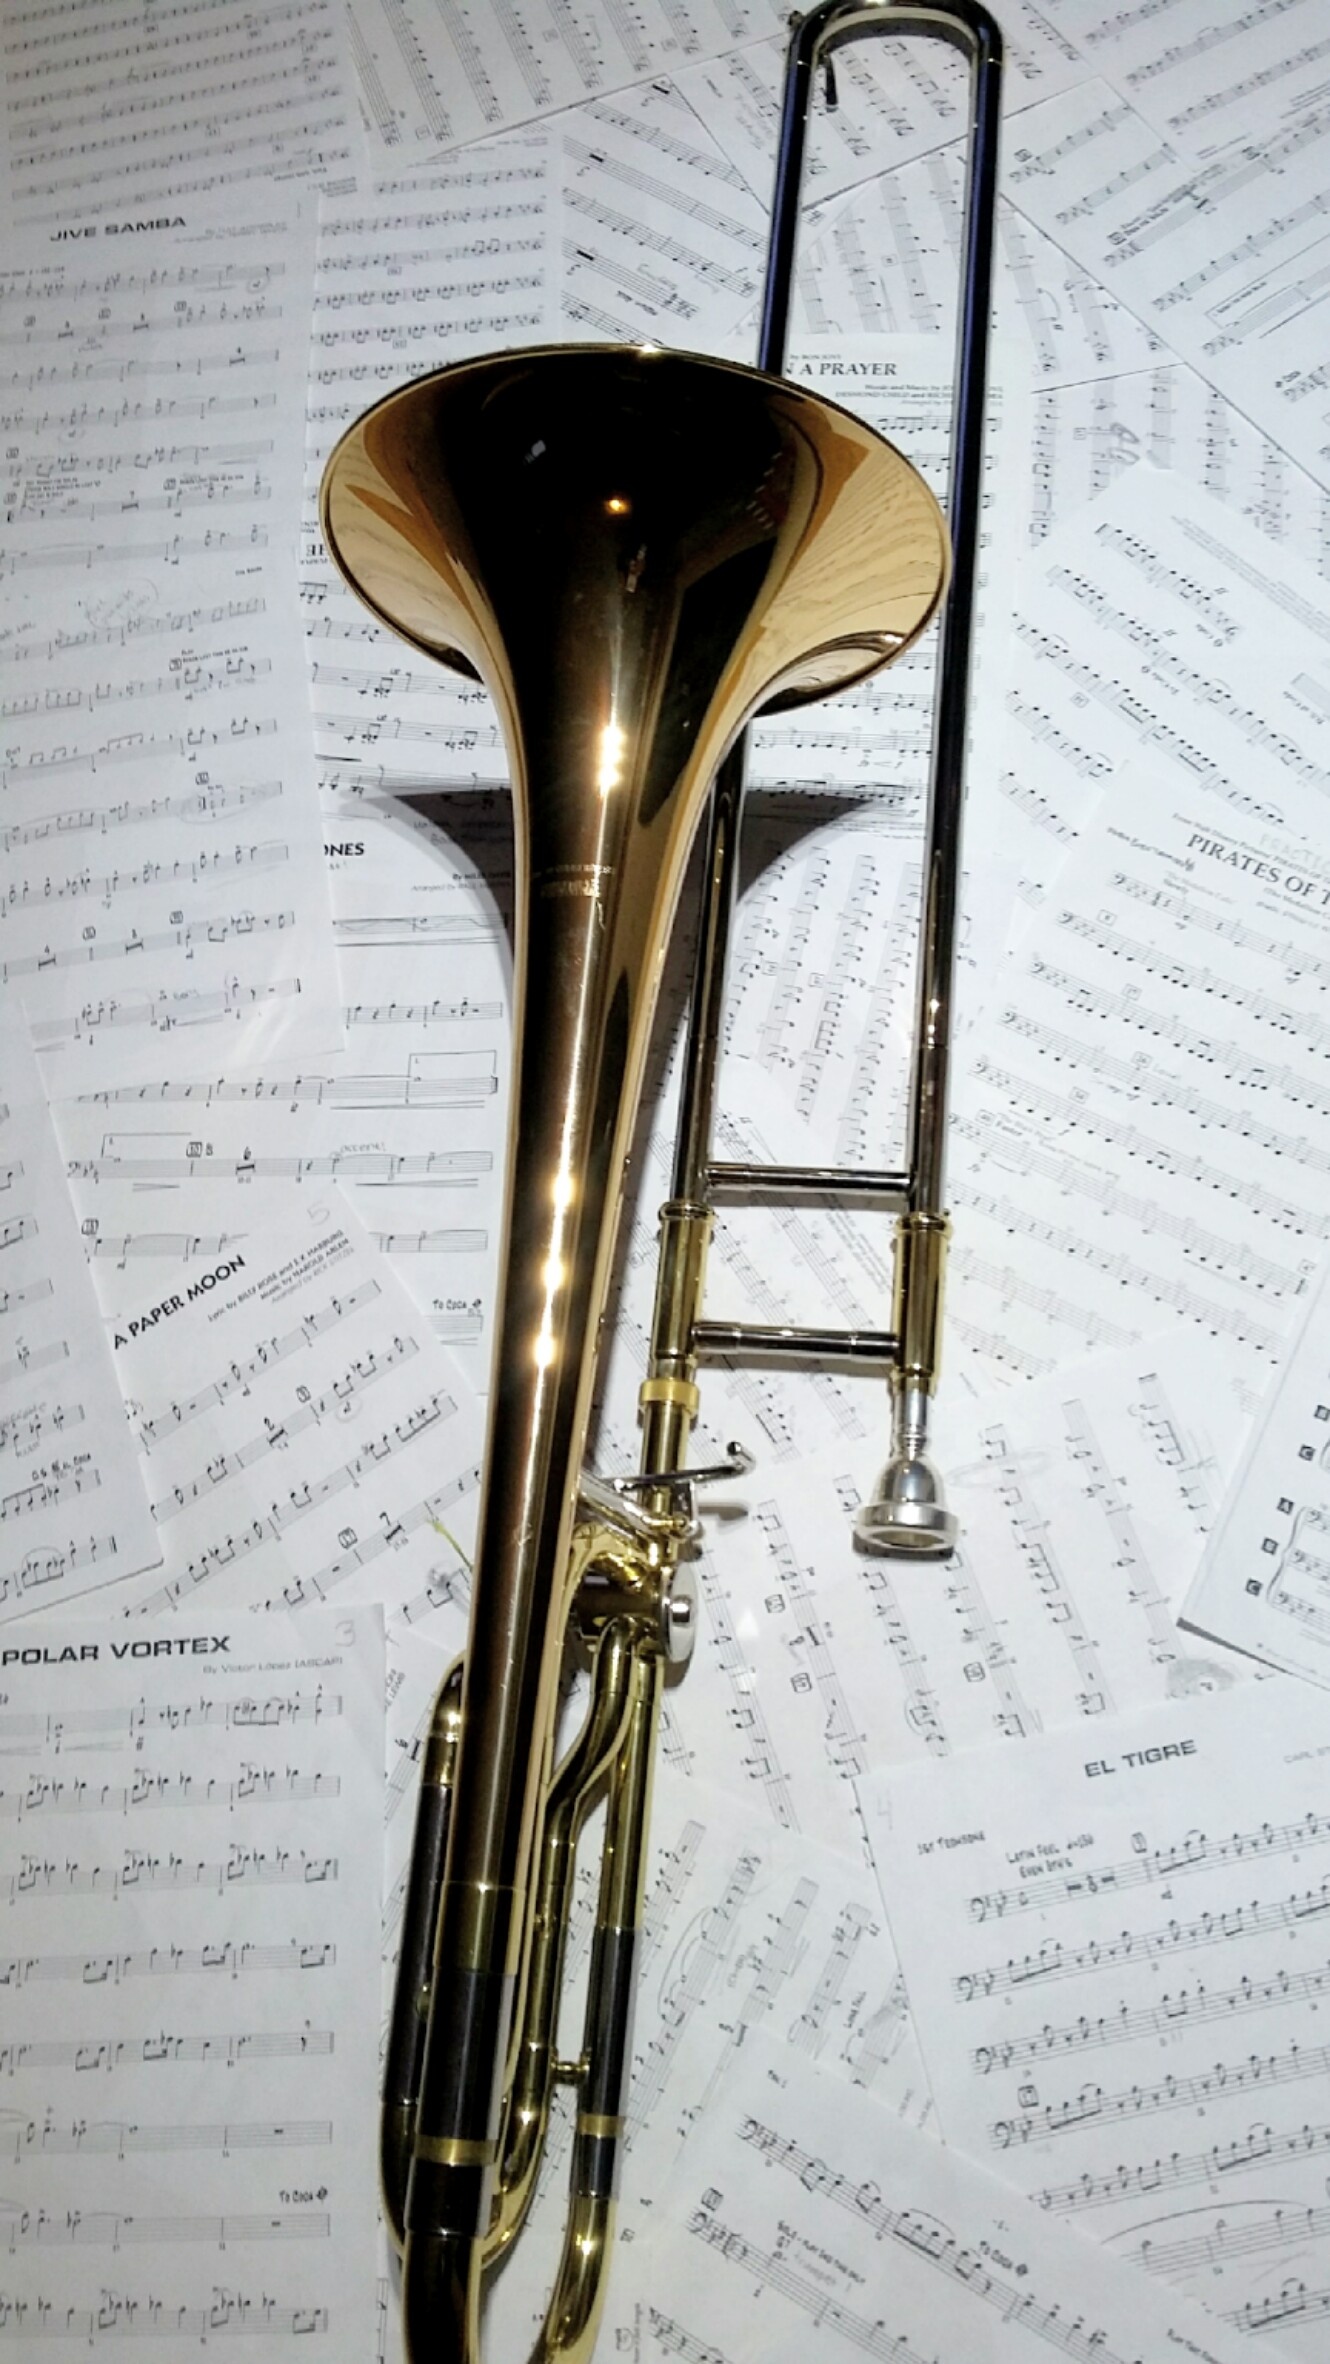 Trombone: A large brass instrument, Different tones are produced by moving the slide, Music notes. 1330x2370 HD Background.